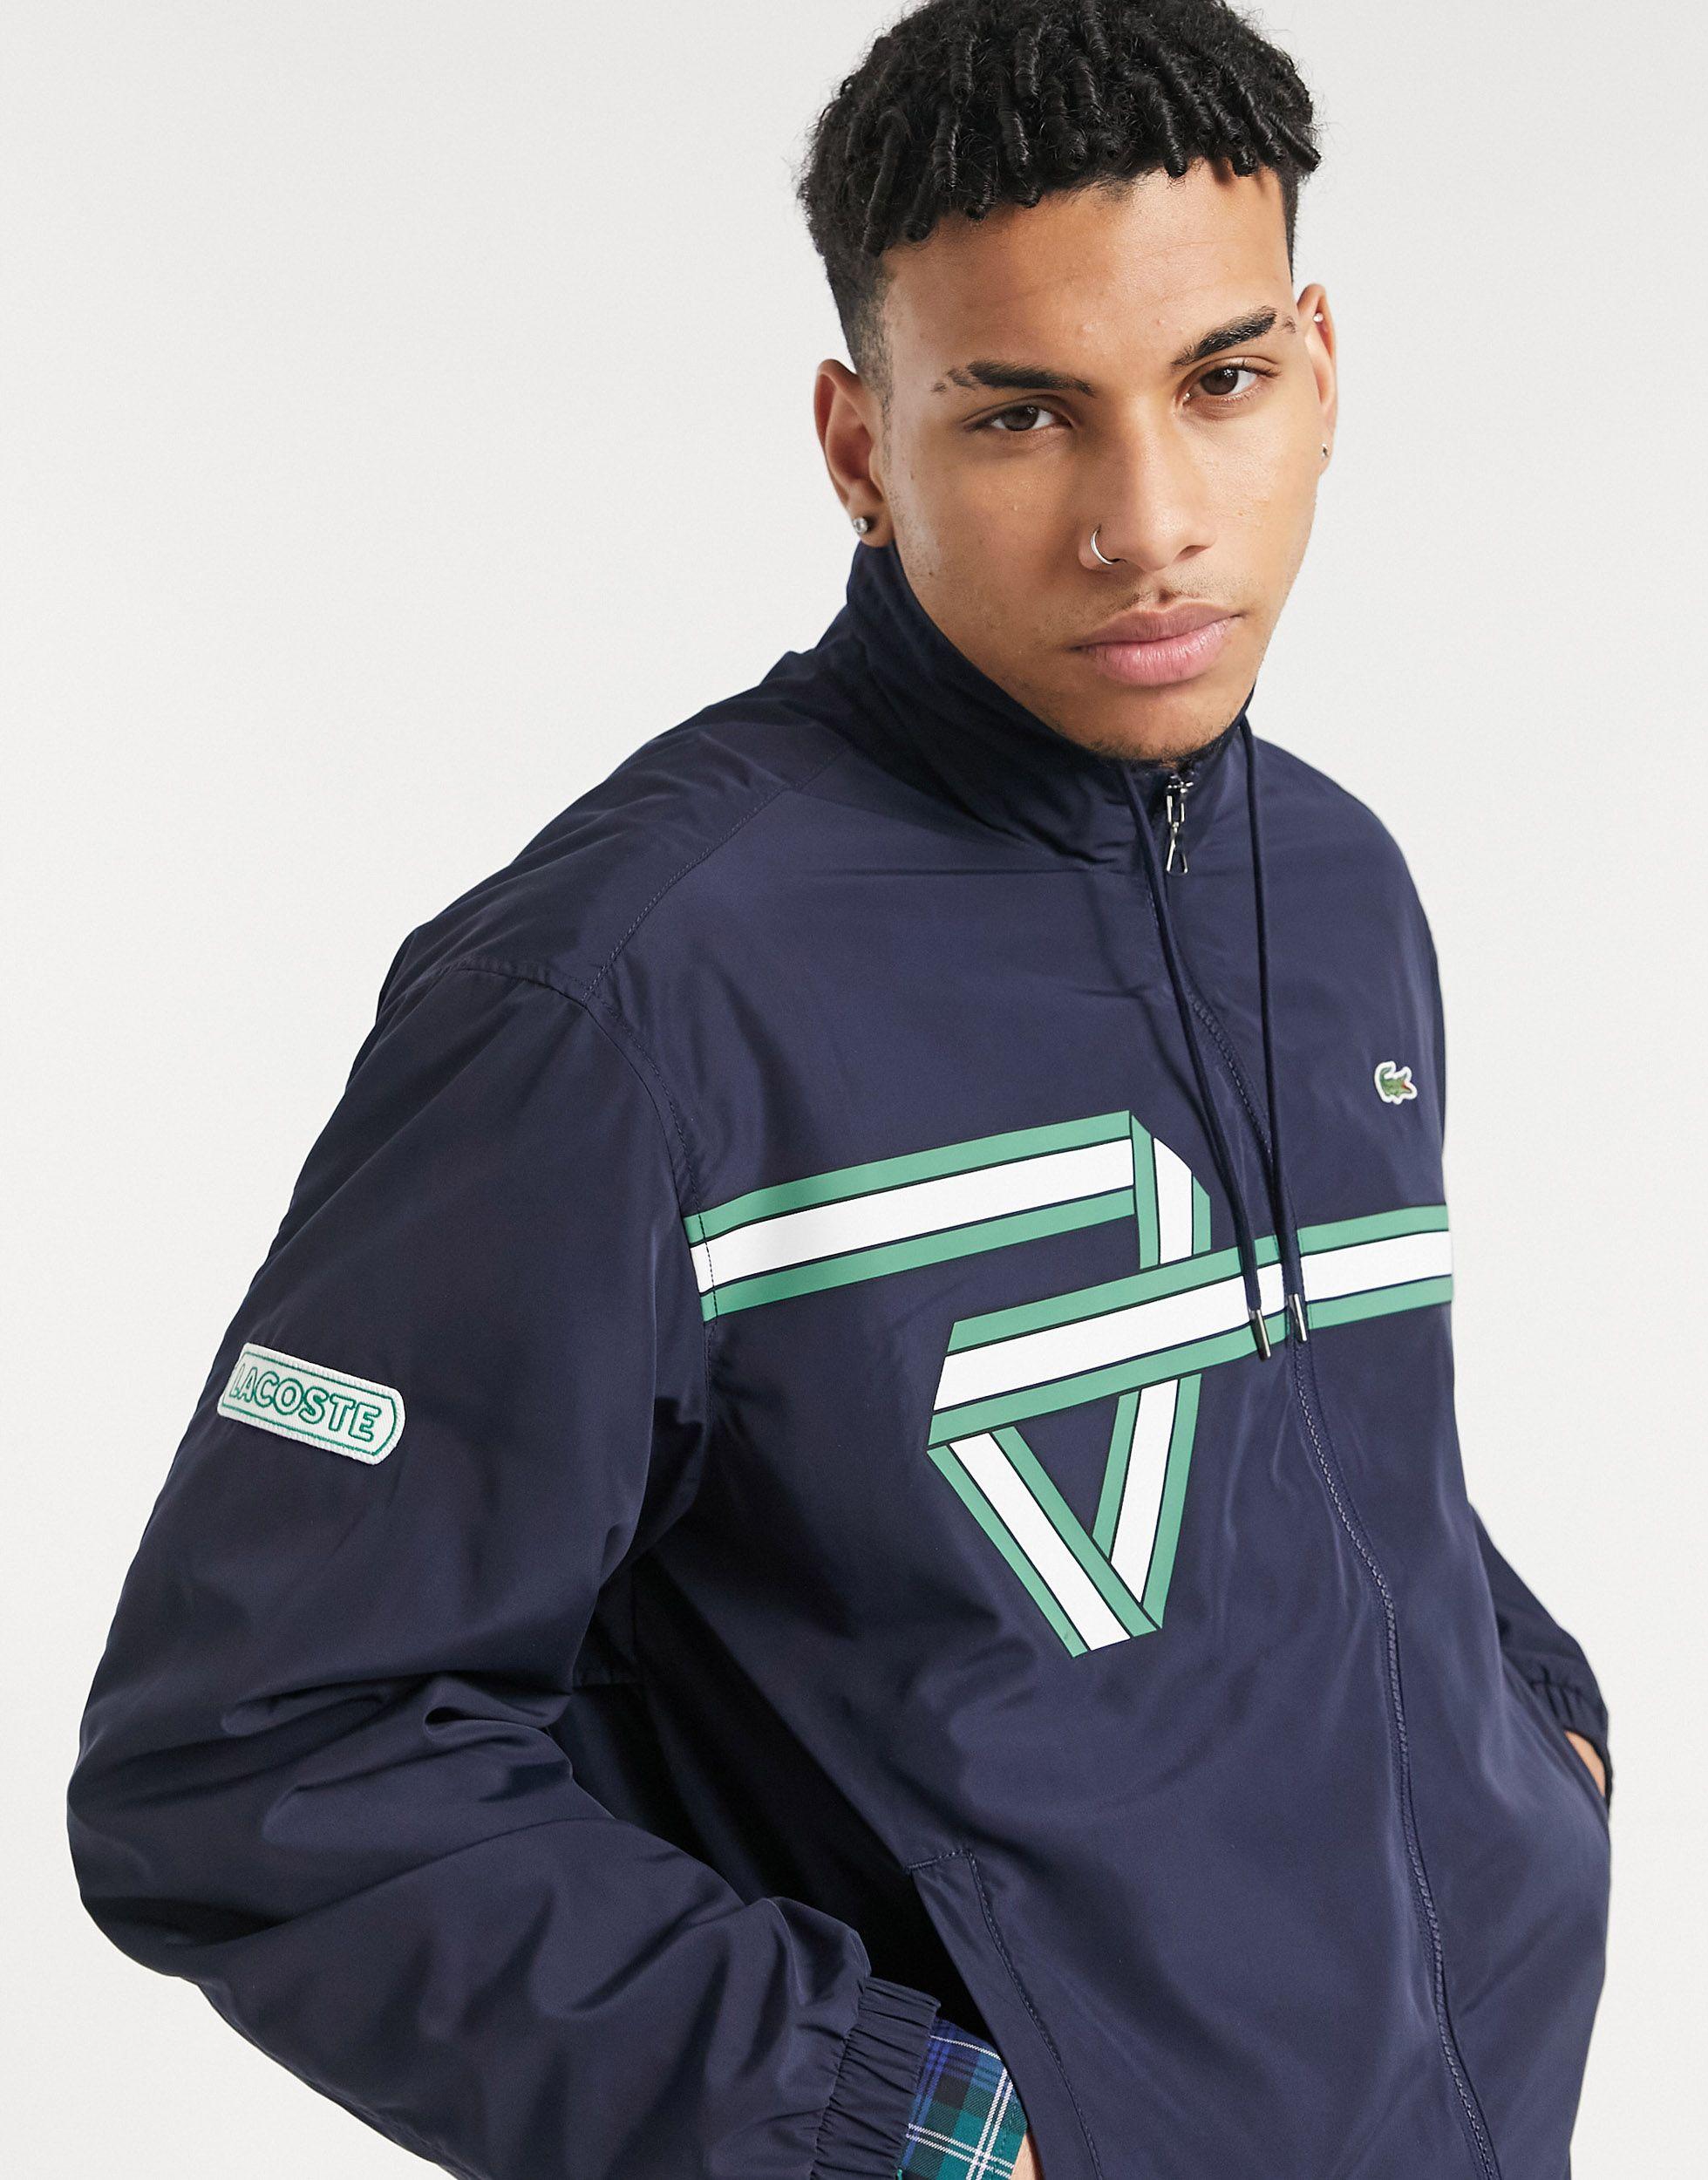 Lacoste Print Band Zip Heritage Tracksuit Jacket in Blue for Men | Lyst